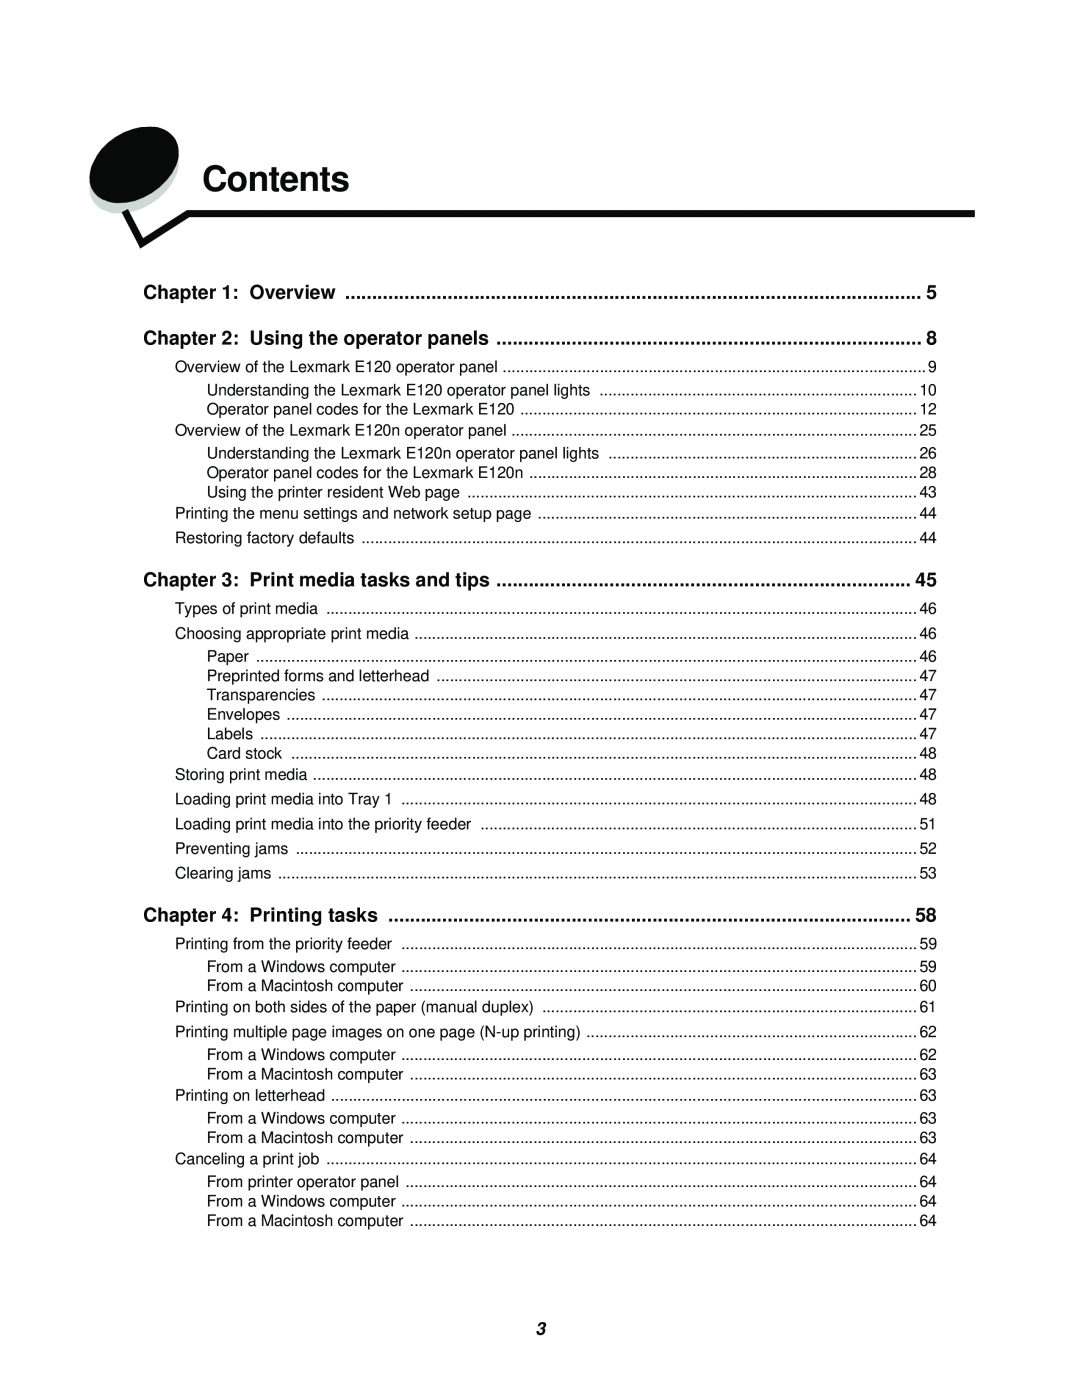 Lexmark 120 manual Contents, Overview, Using the operator panels, Print media tasks and tips, Printing tasks 